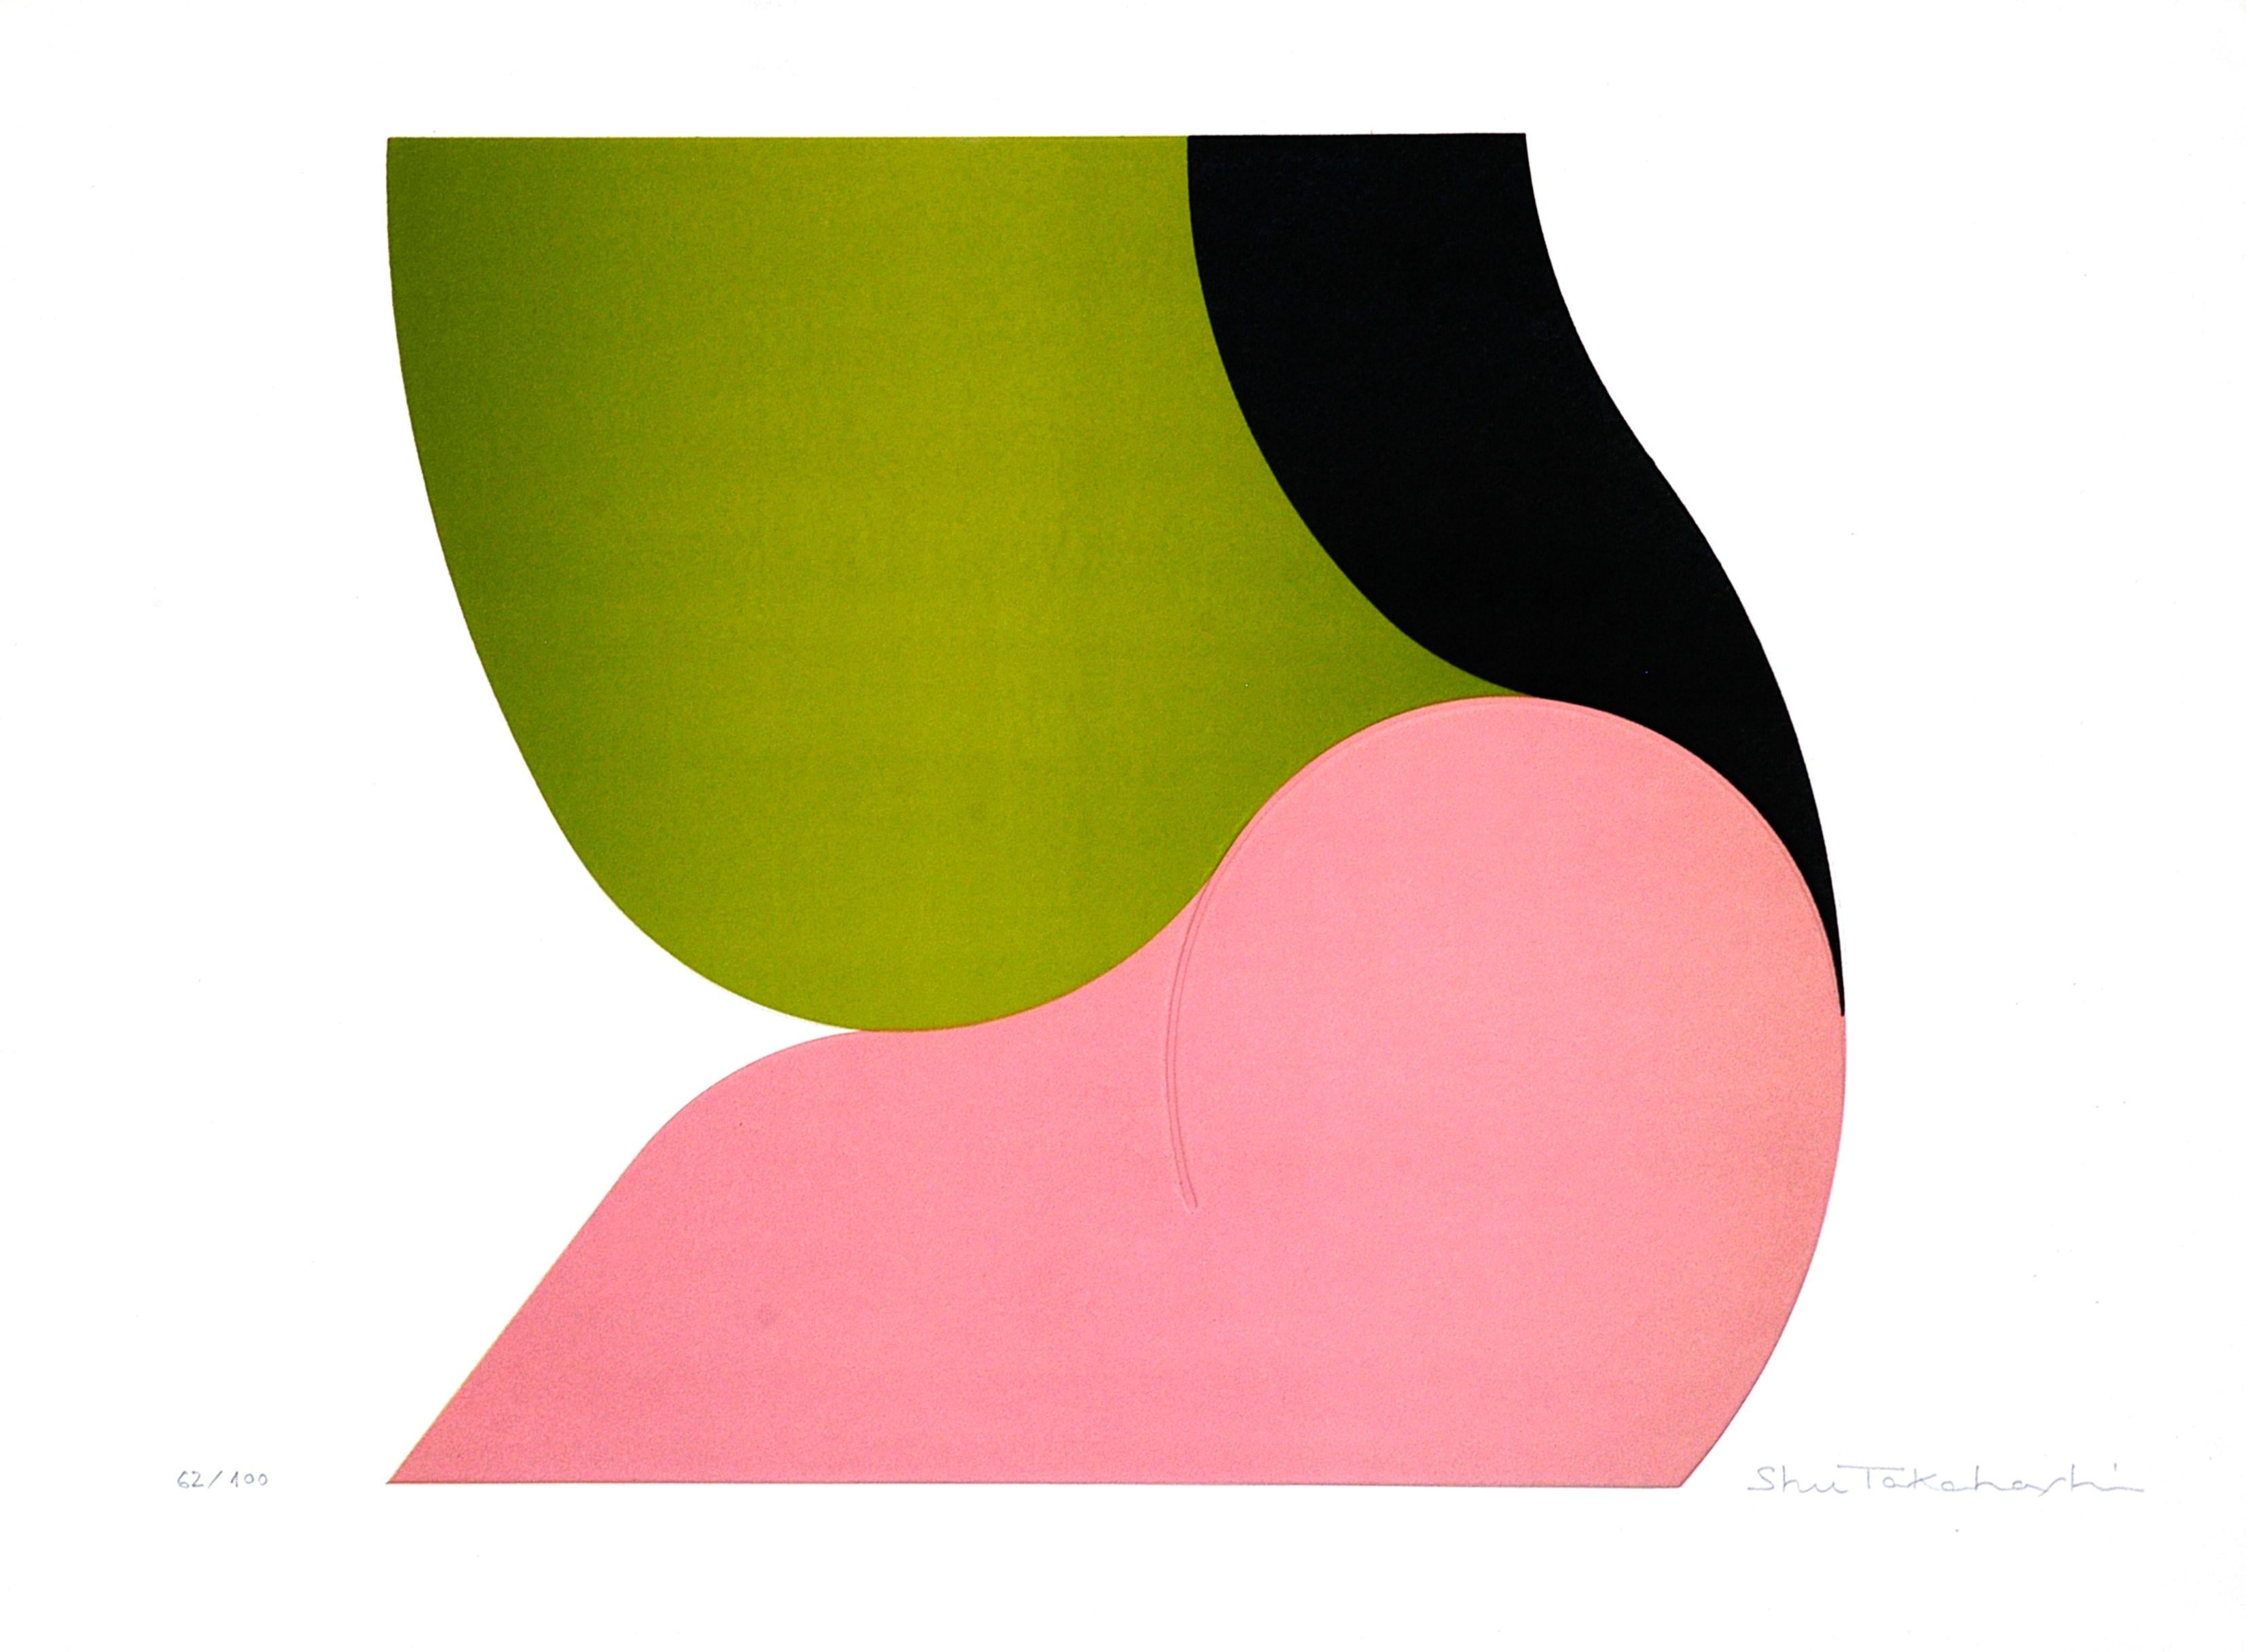 Annunciation is an original print, hand-signed by Shu Takahashi.

This is an edition of 100 prints. Its technique is chalcography and serigraphy.

This beautiful print shows an abstract composition with only two colors: green and pink. While it